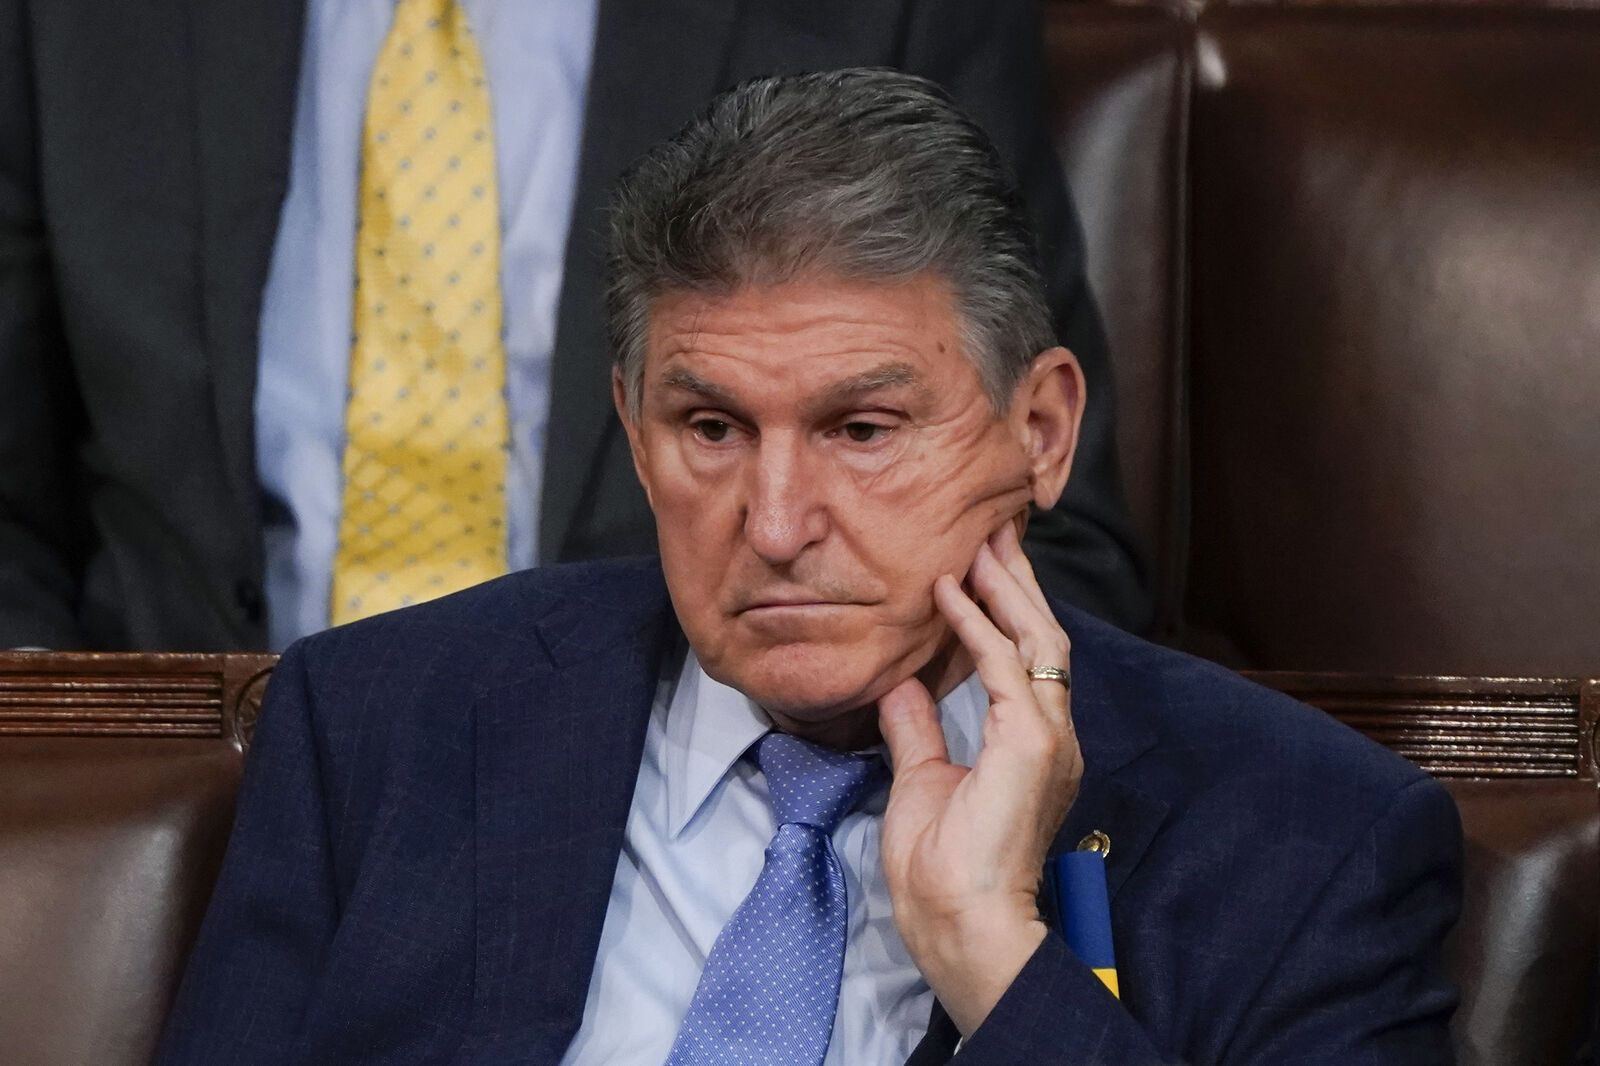 Manchin talks with GOP on energy bill as advocates push Democrats to do it alone